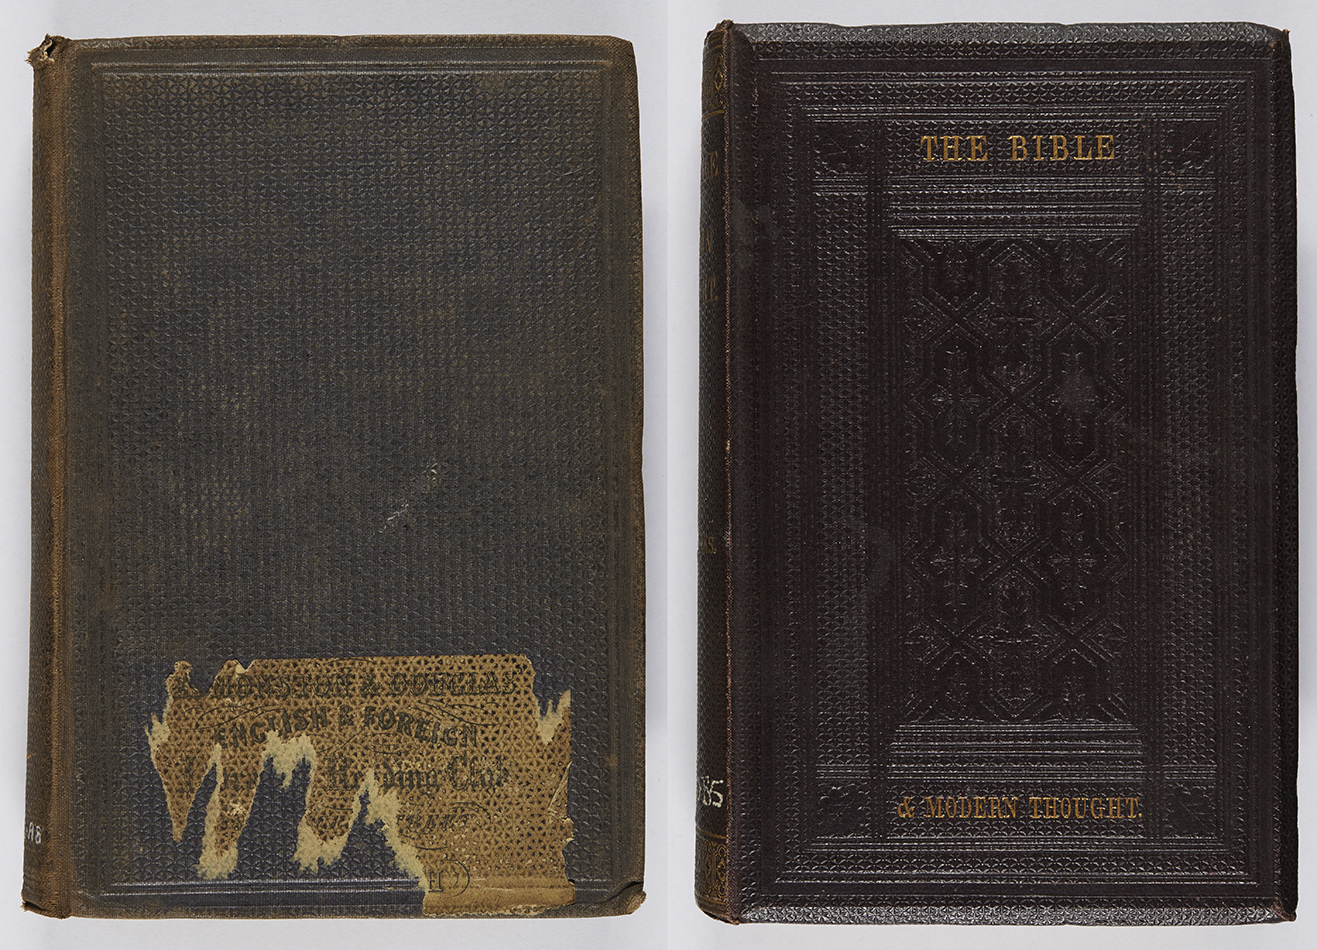 Examples of honeycomb grain; that on the left has the remains of an Edmonston & Douglas reading club sticker on the front, whilst that on the right is also blocked in blind. Both works were bound by Westleys & Co., publishers often outsourcing the binding of works to binders. Henry Alford, Sermons on Christian doctrine (London: Rivingtons, 1862), For BV4253.A8 ; T. R. Birks, The Bible and modern thought (London: The Religious Tract Society, 1862), For BS480.B5.